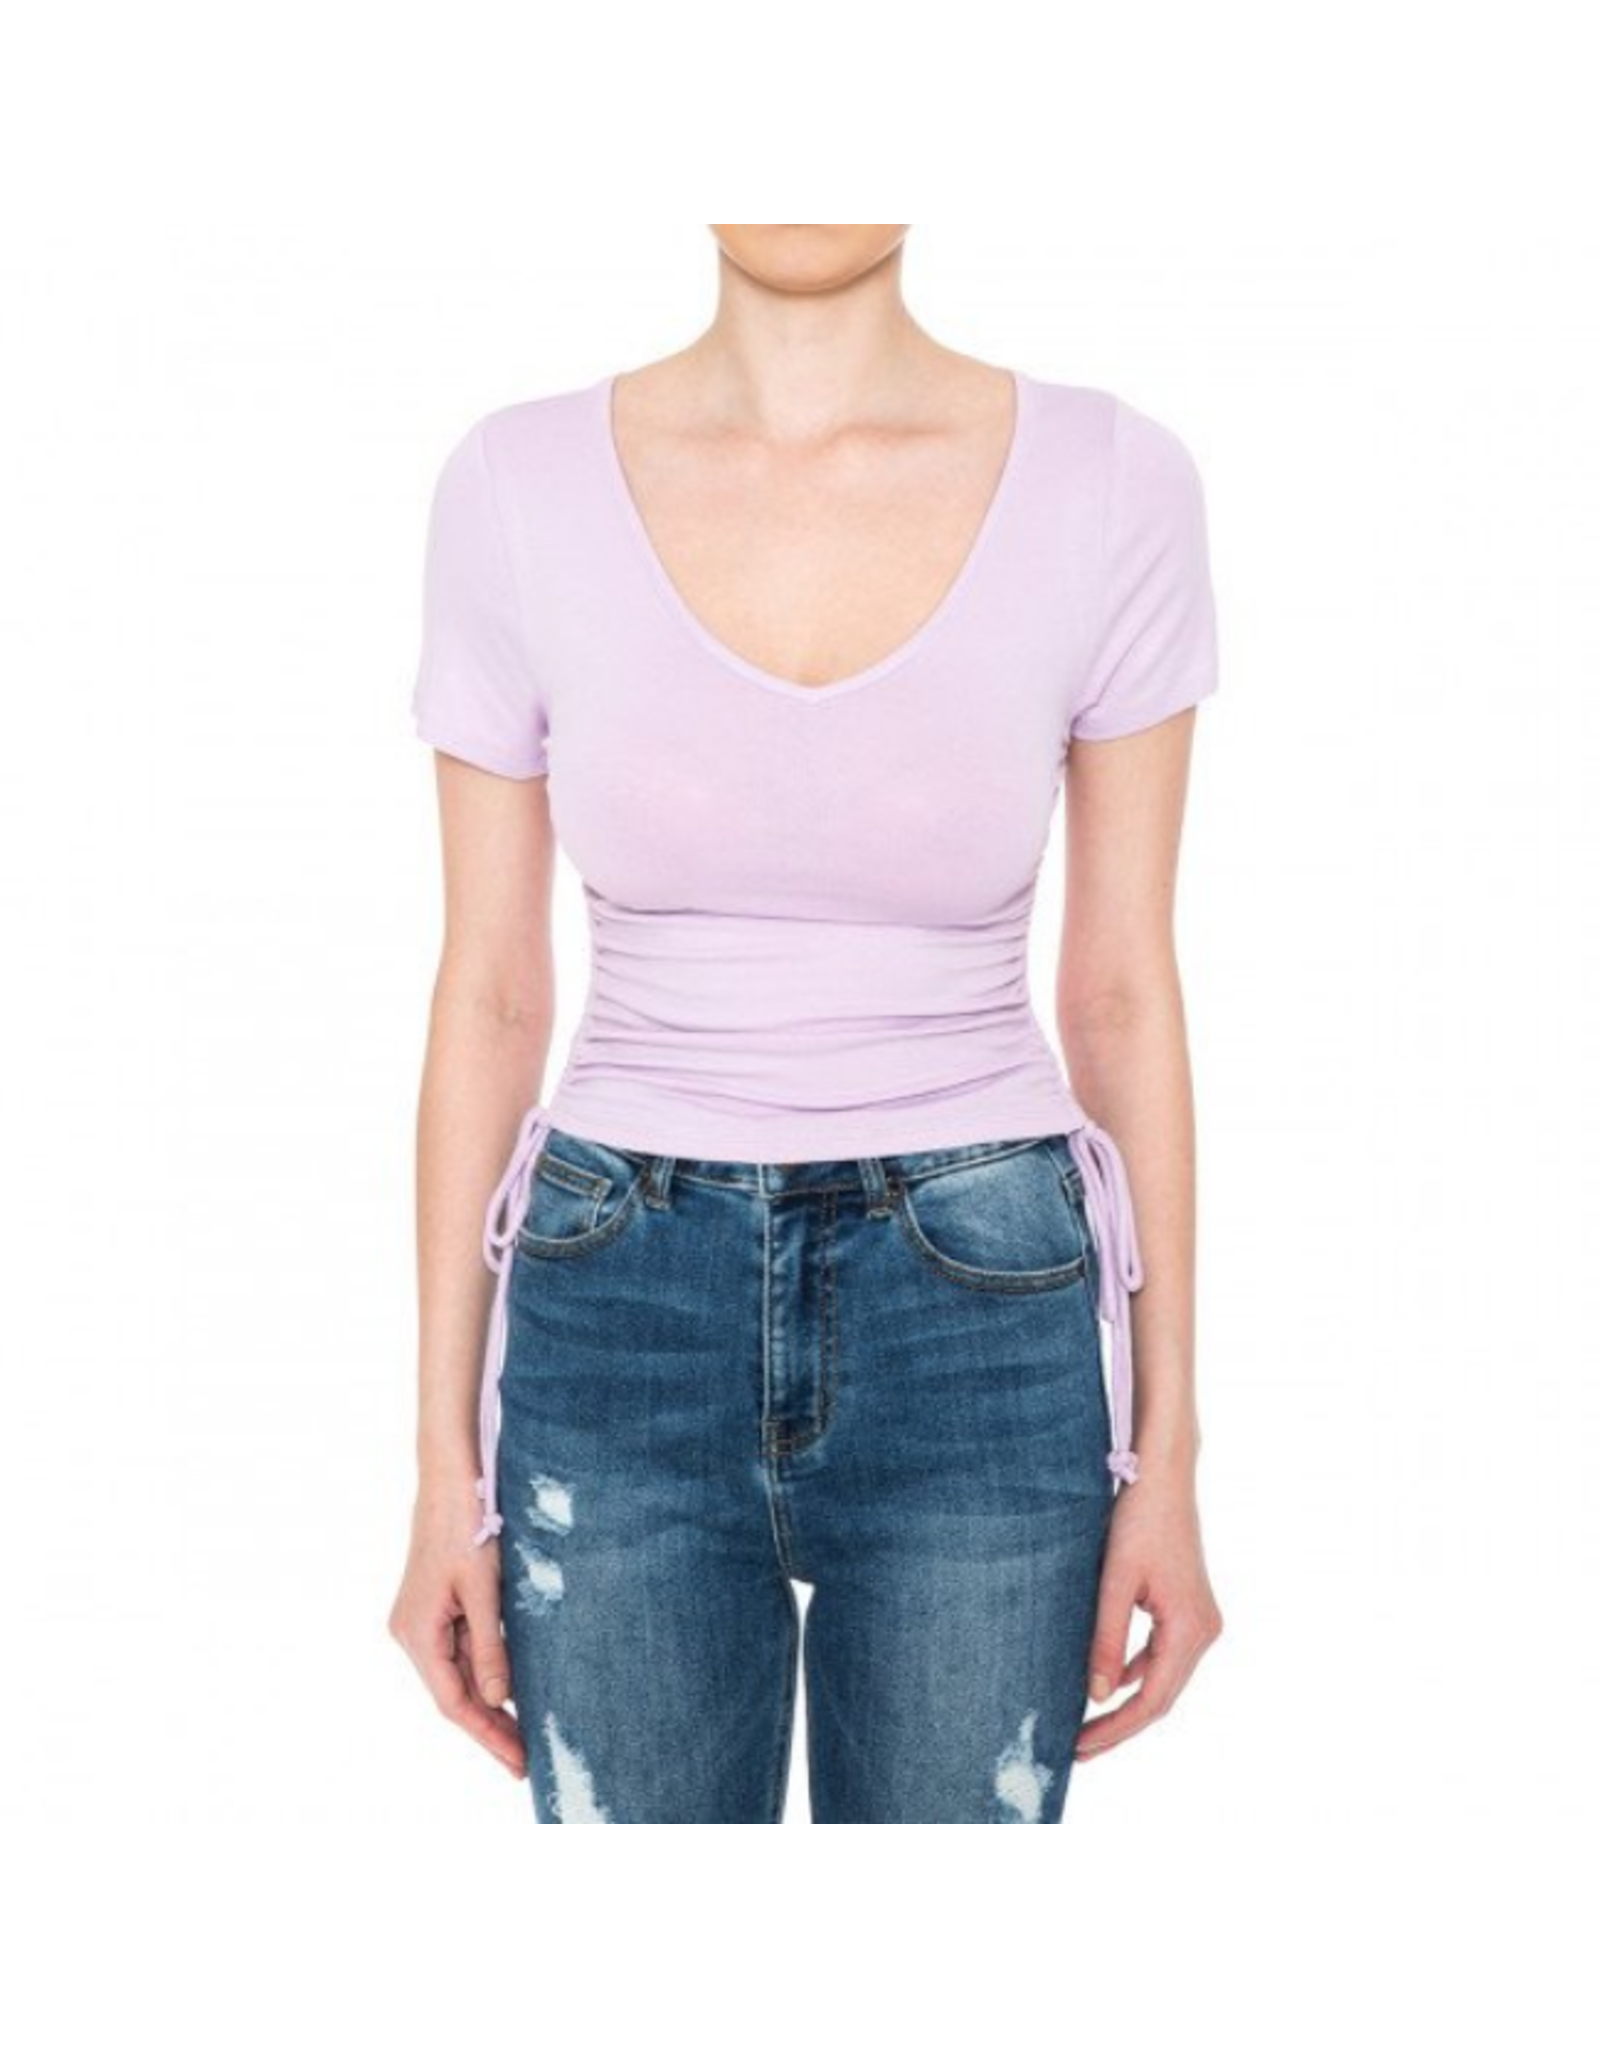 Ambiance Ambiance - Women's Ruch Side Crop Top - 73434